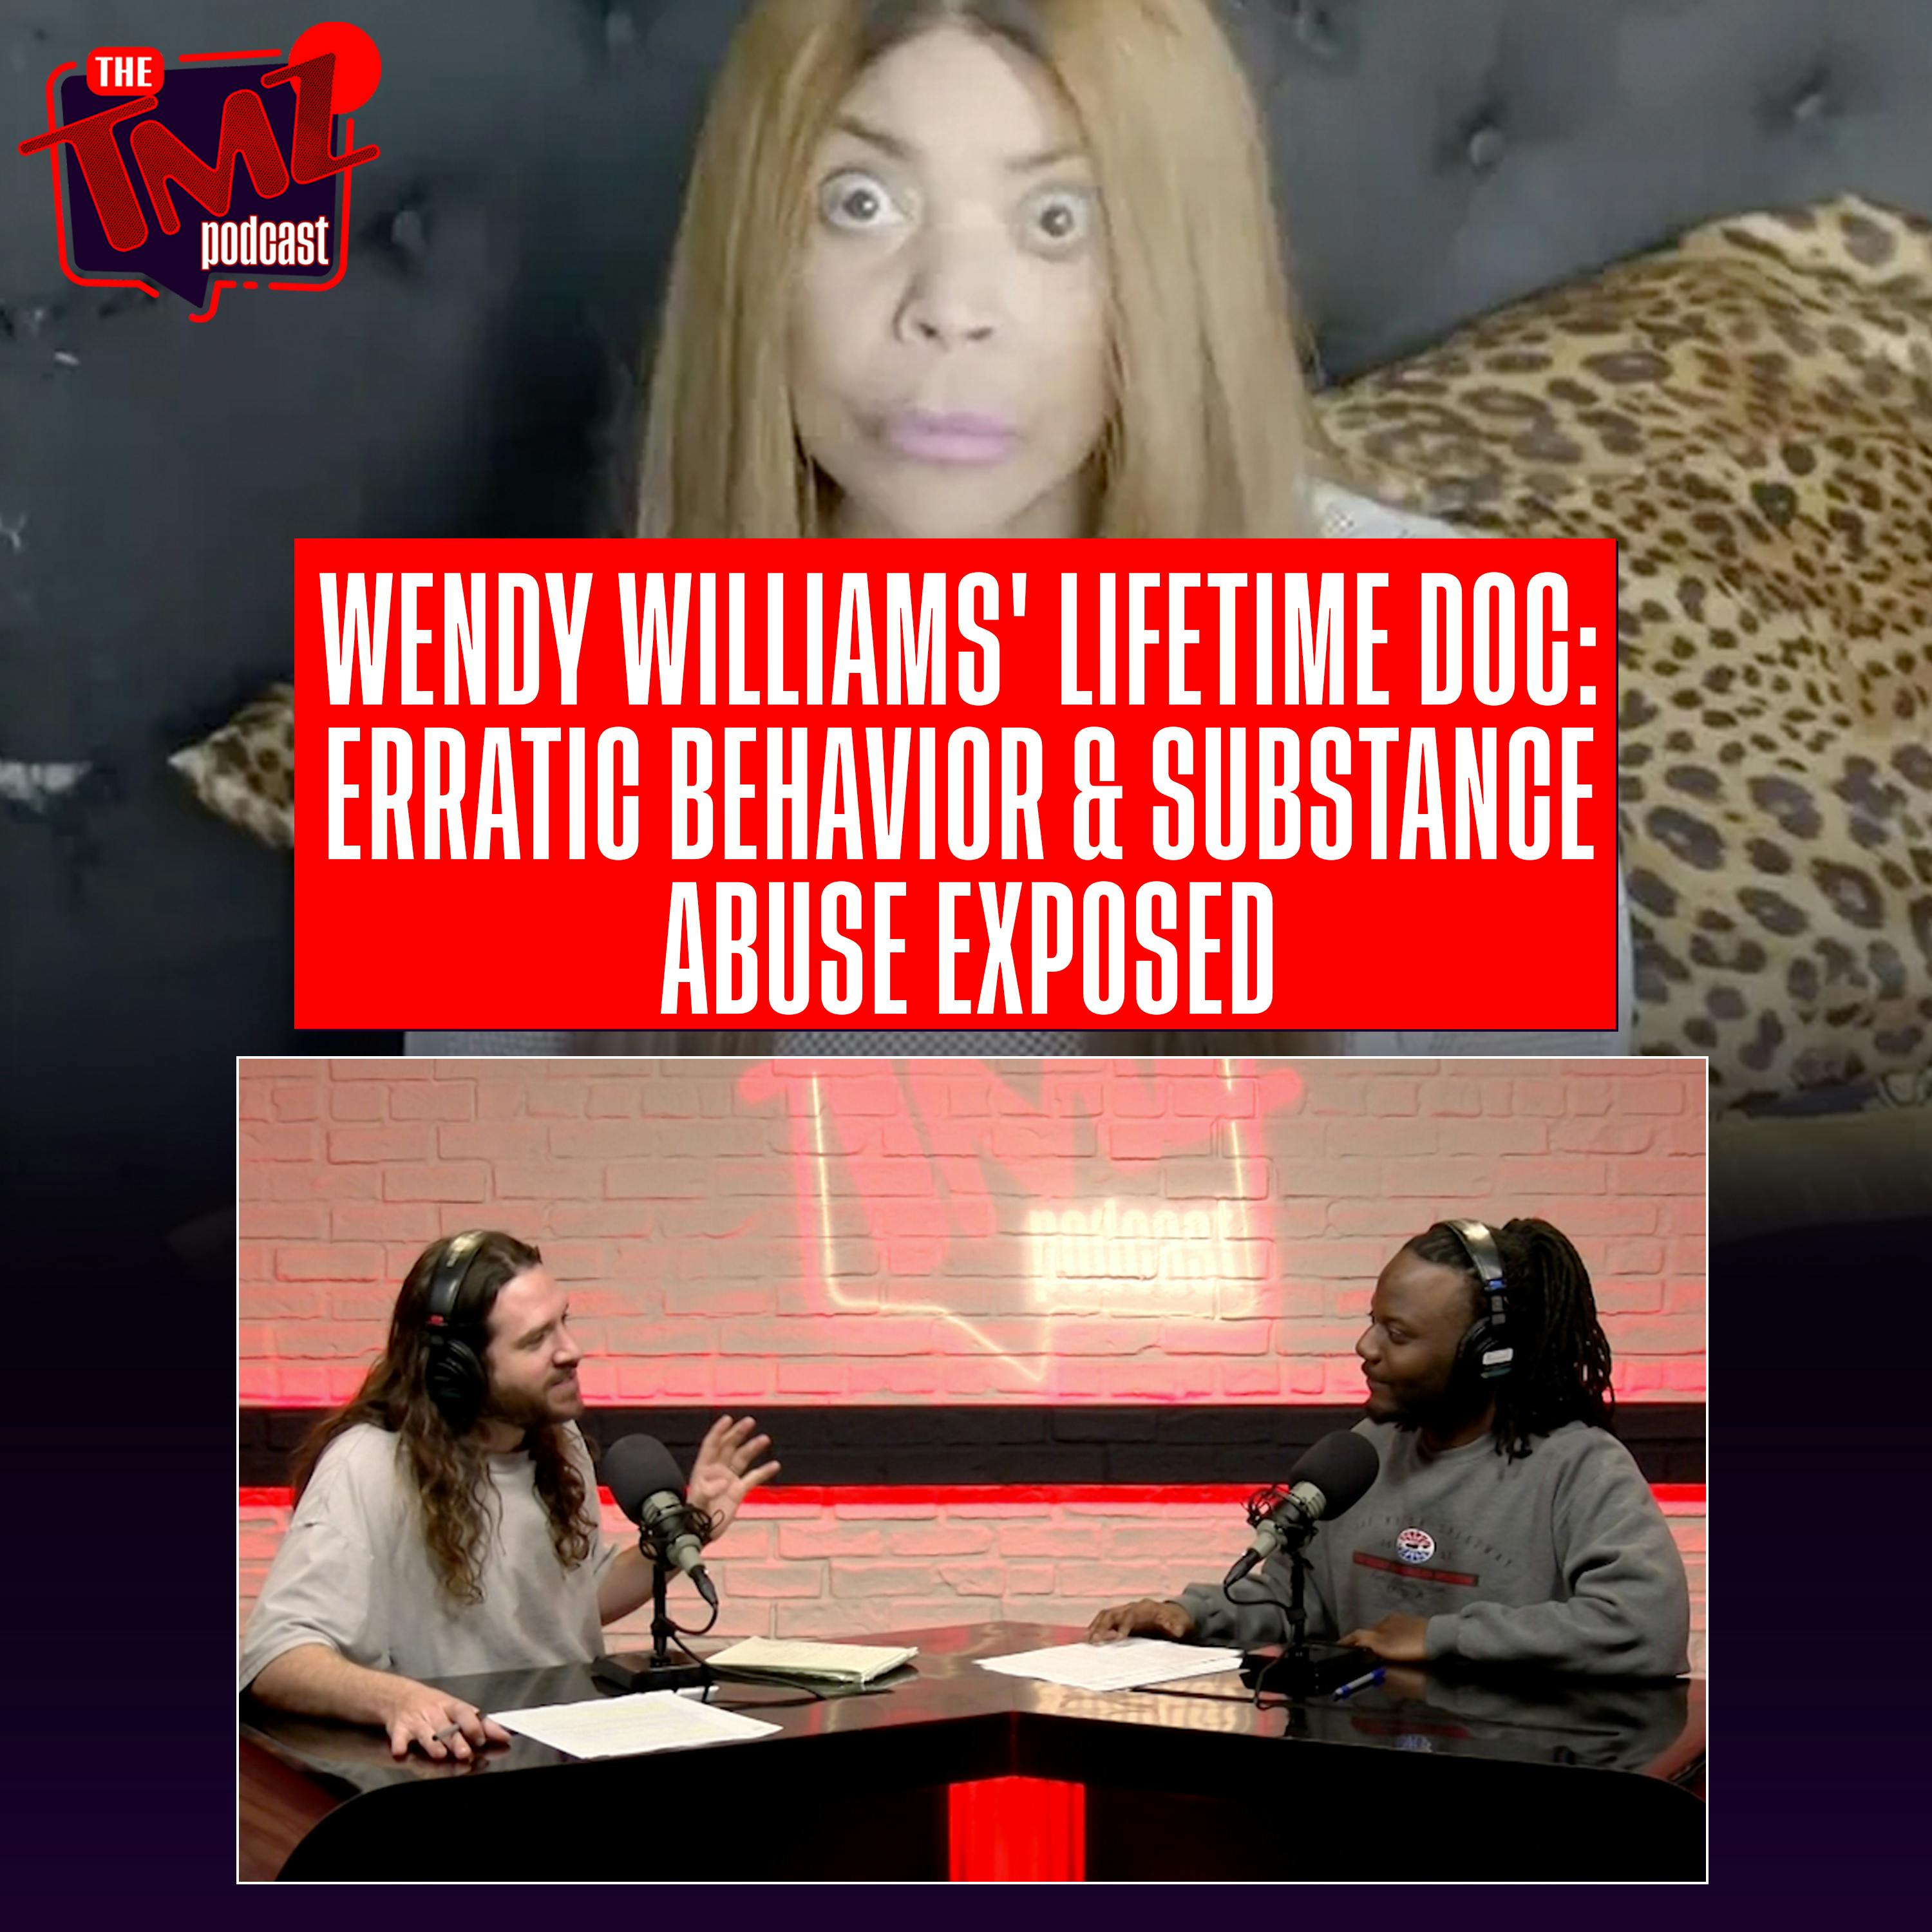 Wendy Williams' Erratic Behavior & Substance Abuse Exposed In New Lifetime Doc